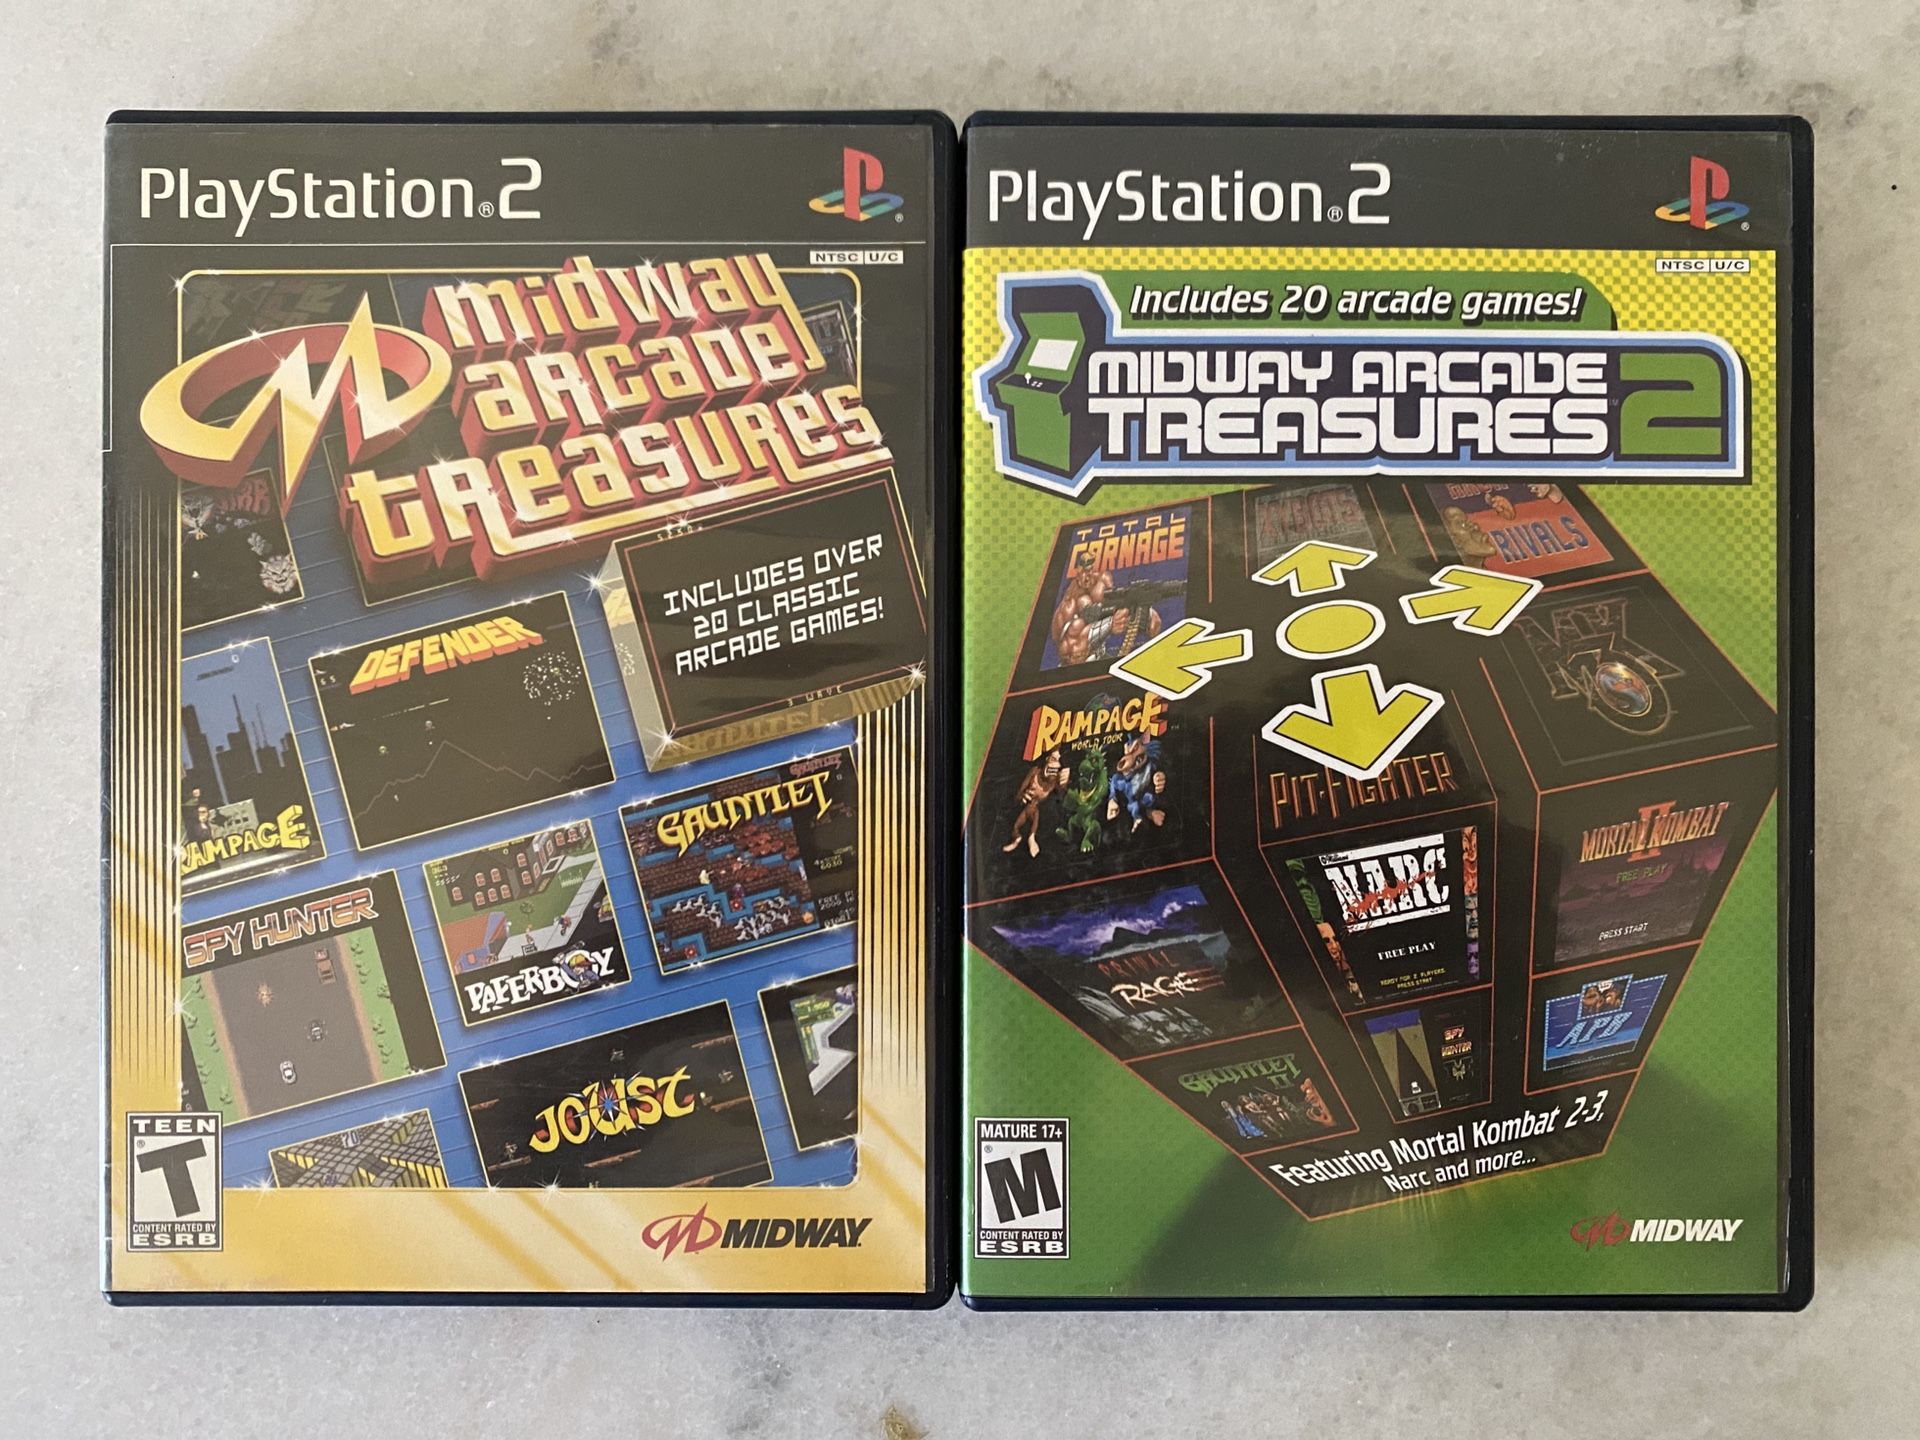 PLAY STATION 2: MIDWAY ARCADE TREASURES 1 & 2